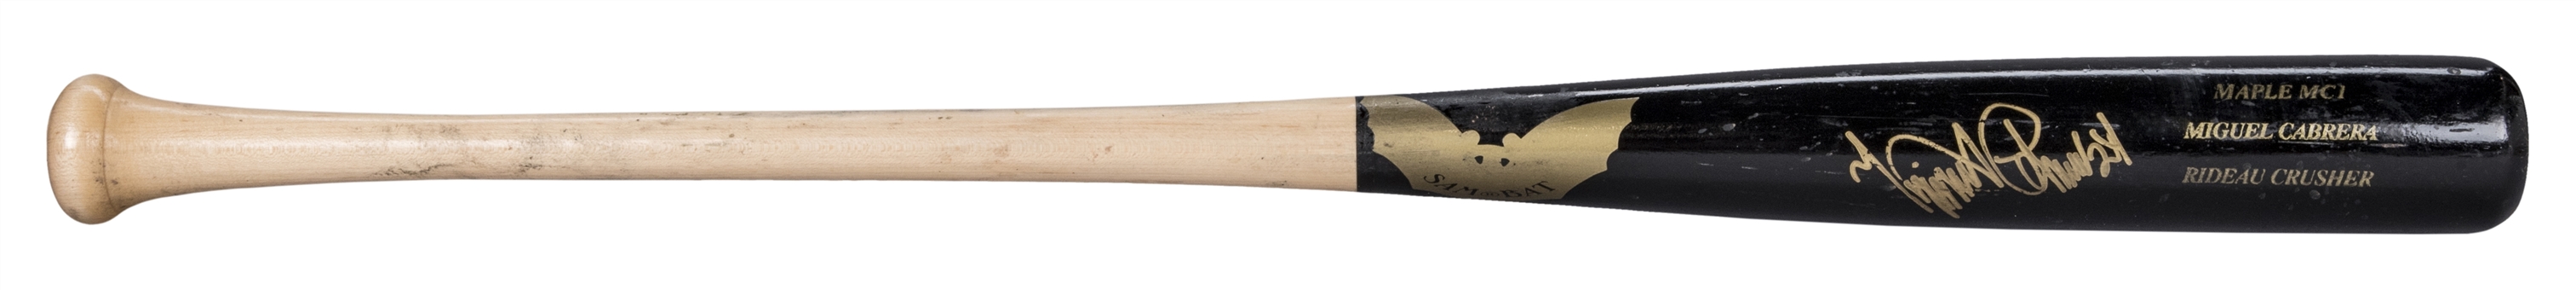 2010 Miguel Cabrera Game Used and Signed Old Maple Bat Co. MC1 Model Bat (PSA/DNA GU 8)